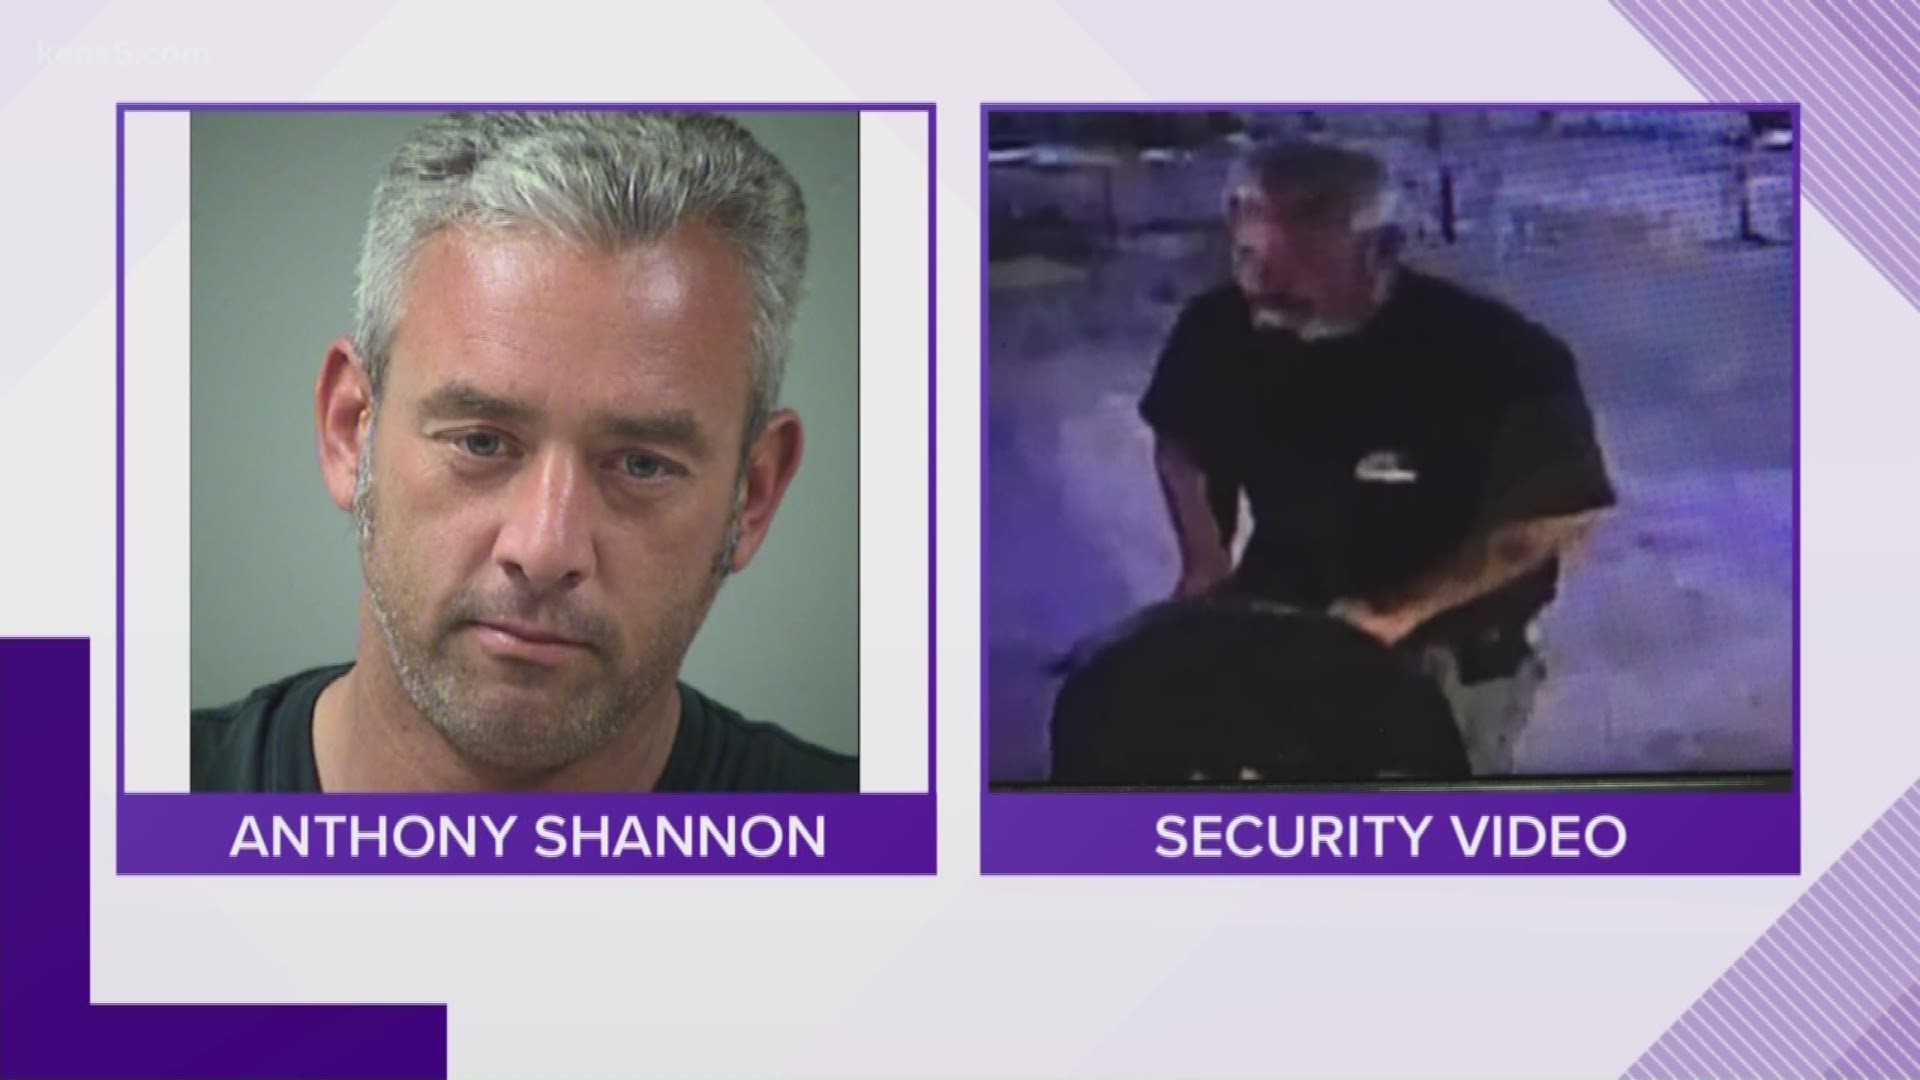 For the first time - KENS 5 has a look inside the home of the man accused of stealing the live shark. We've also learned how police believe 38-year-old Anthony Shannon kept the animal alive. Eyewitness News reporter Sharon Ko is live.